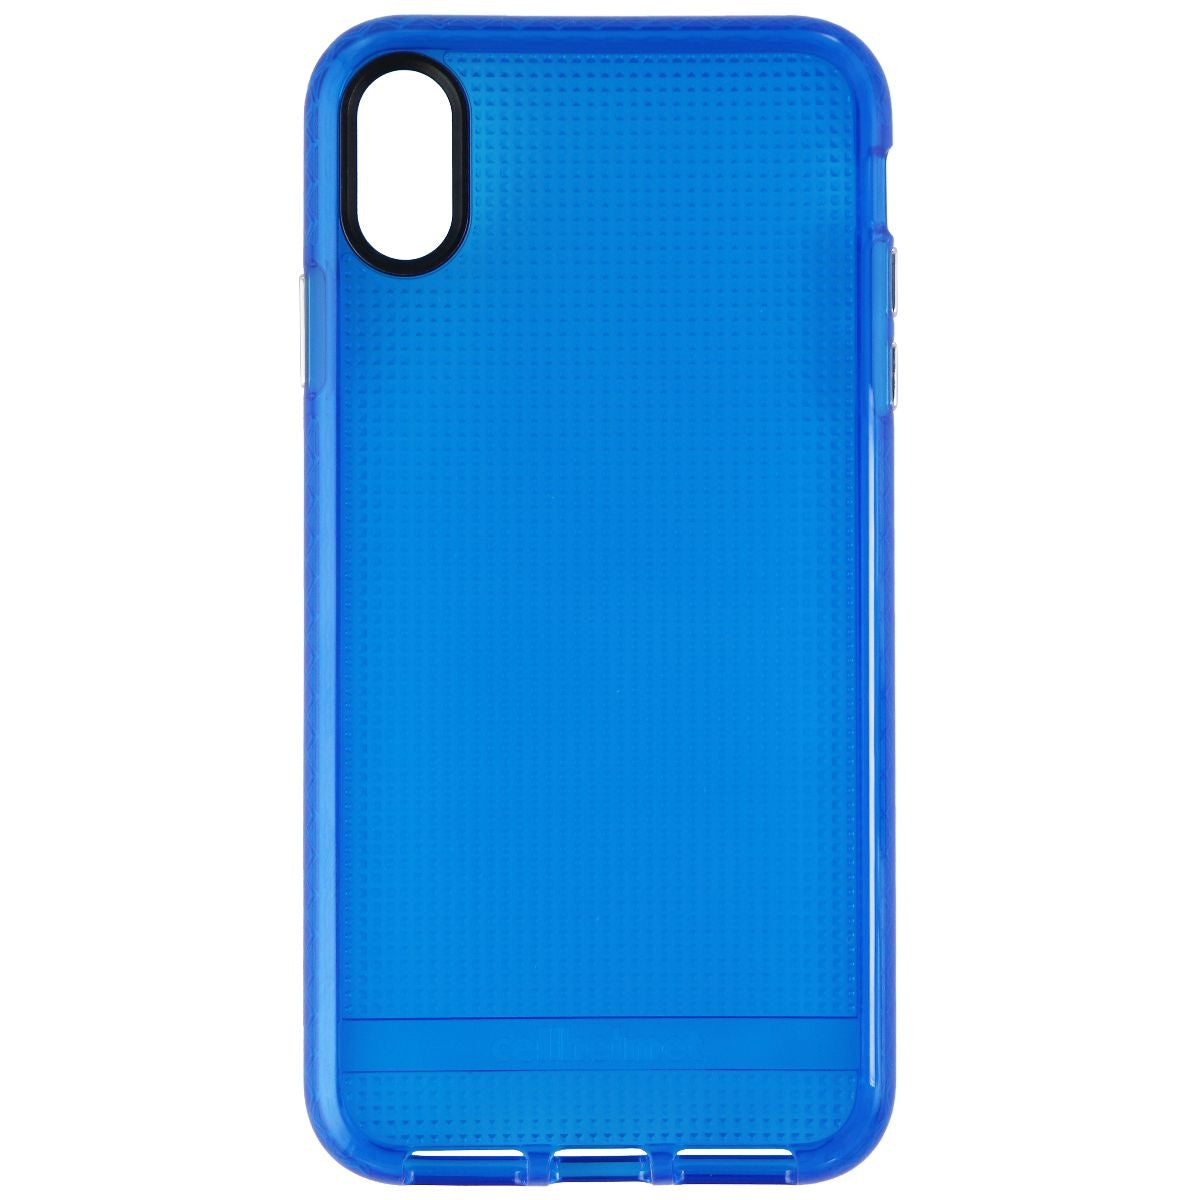 DO NOT USE - Please Check SC-P13164 Family Cell Phone - Cases, Covers & Skins CellHelmet    - Simple Cell Bulk Wholesale Pricing - USA Seller